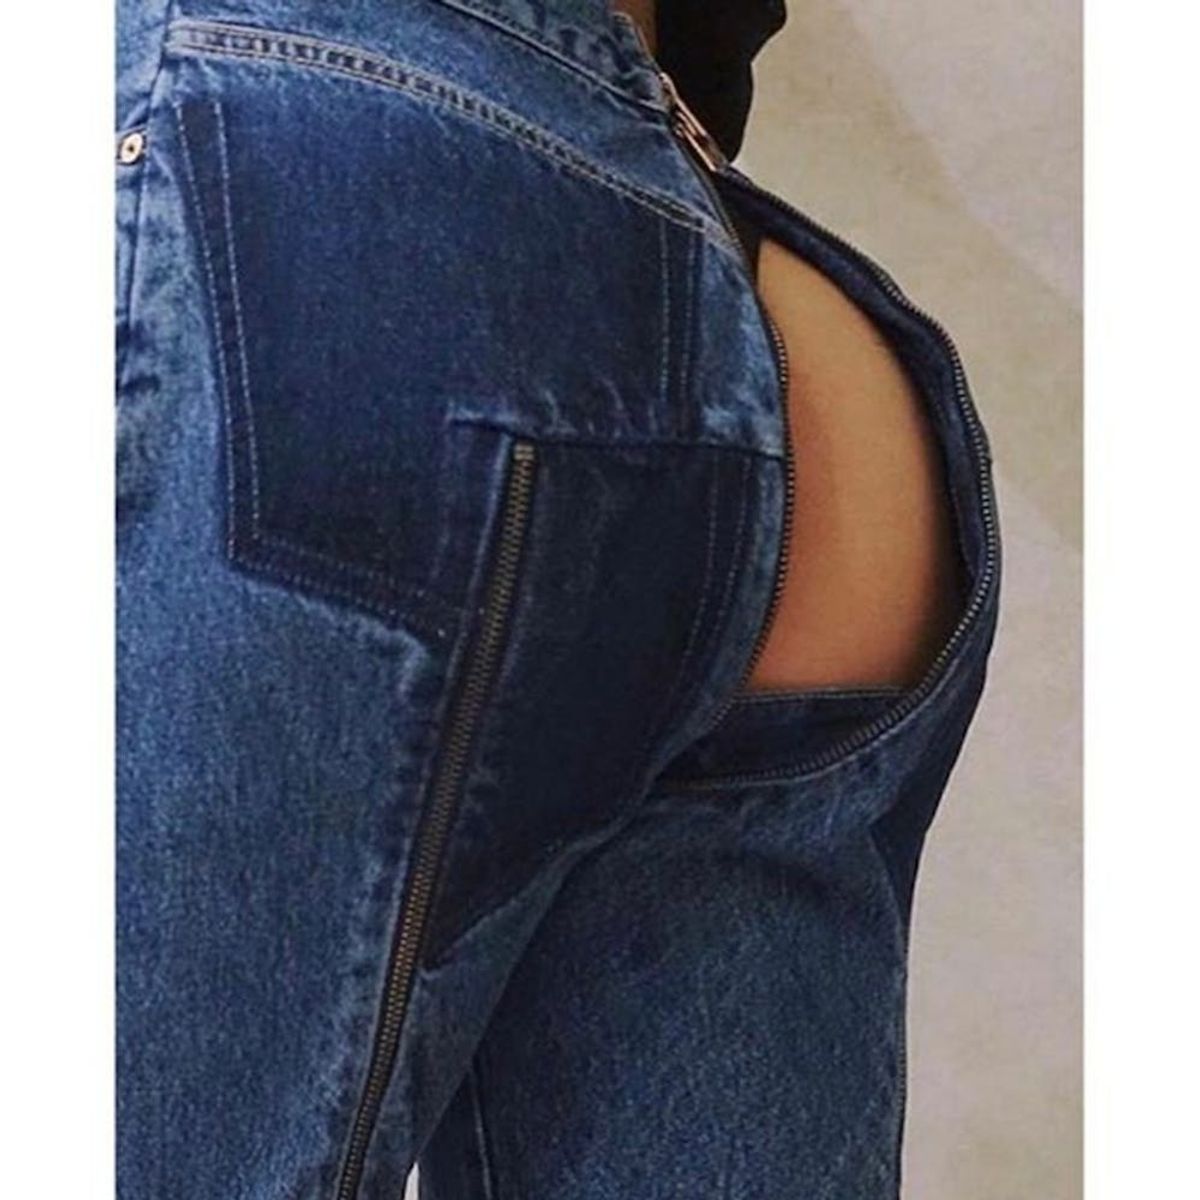 Bare-Butt Jeans Are the Latest Crazy Denim Trend